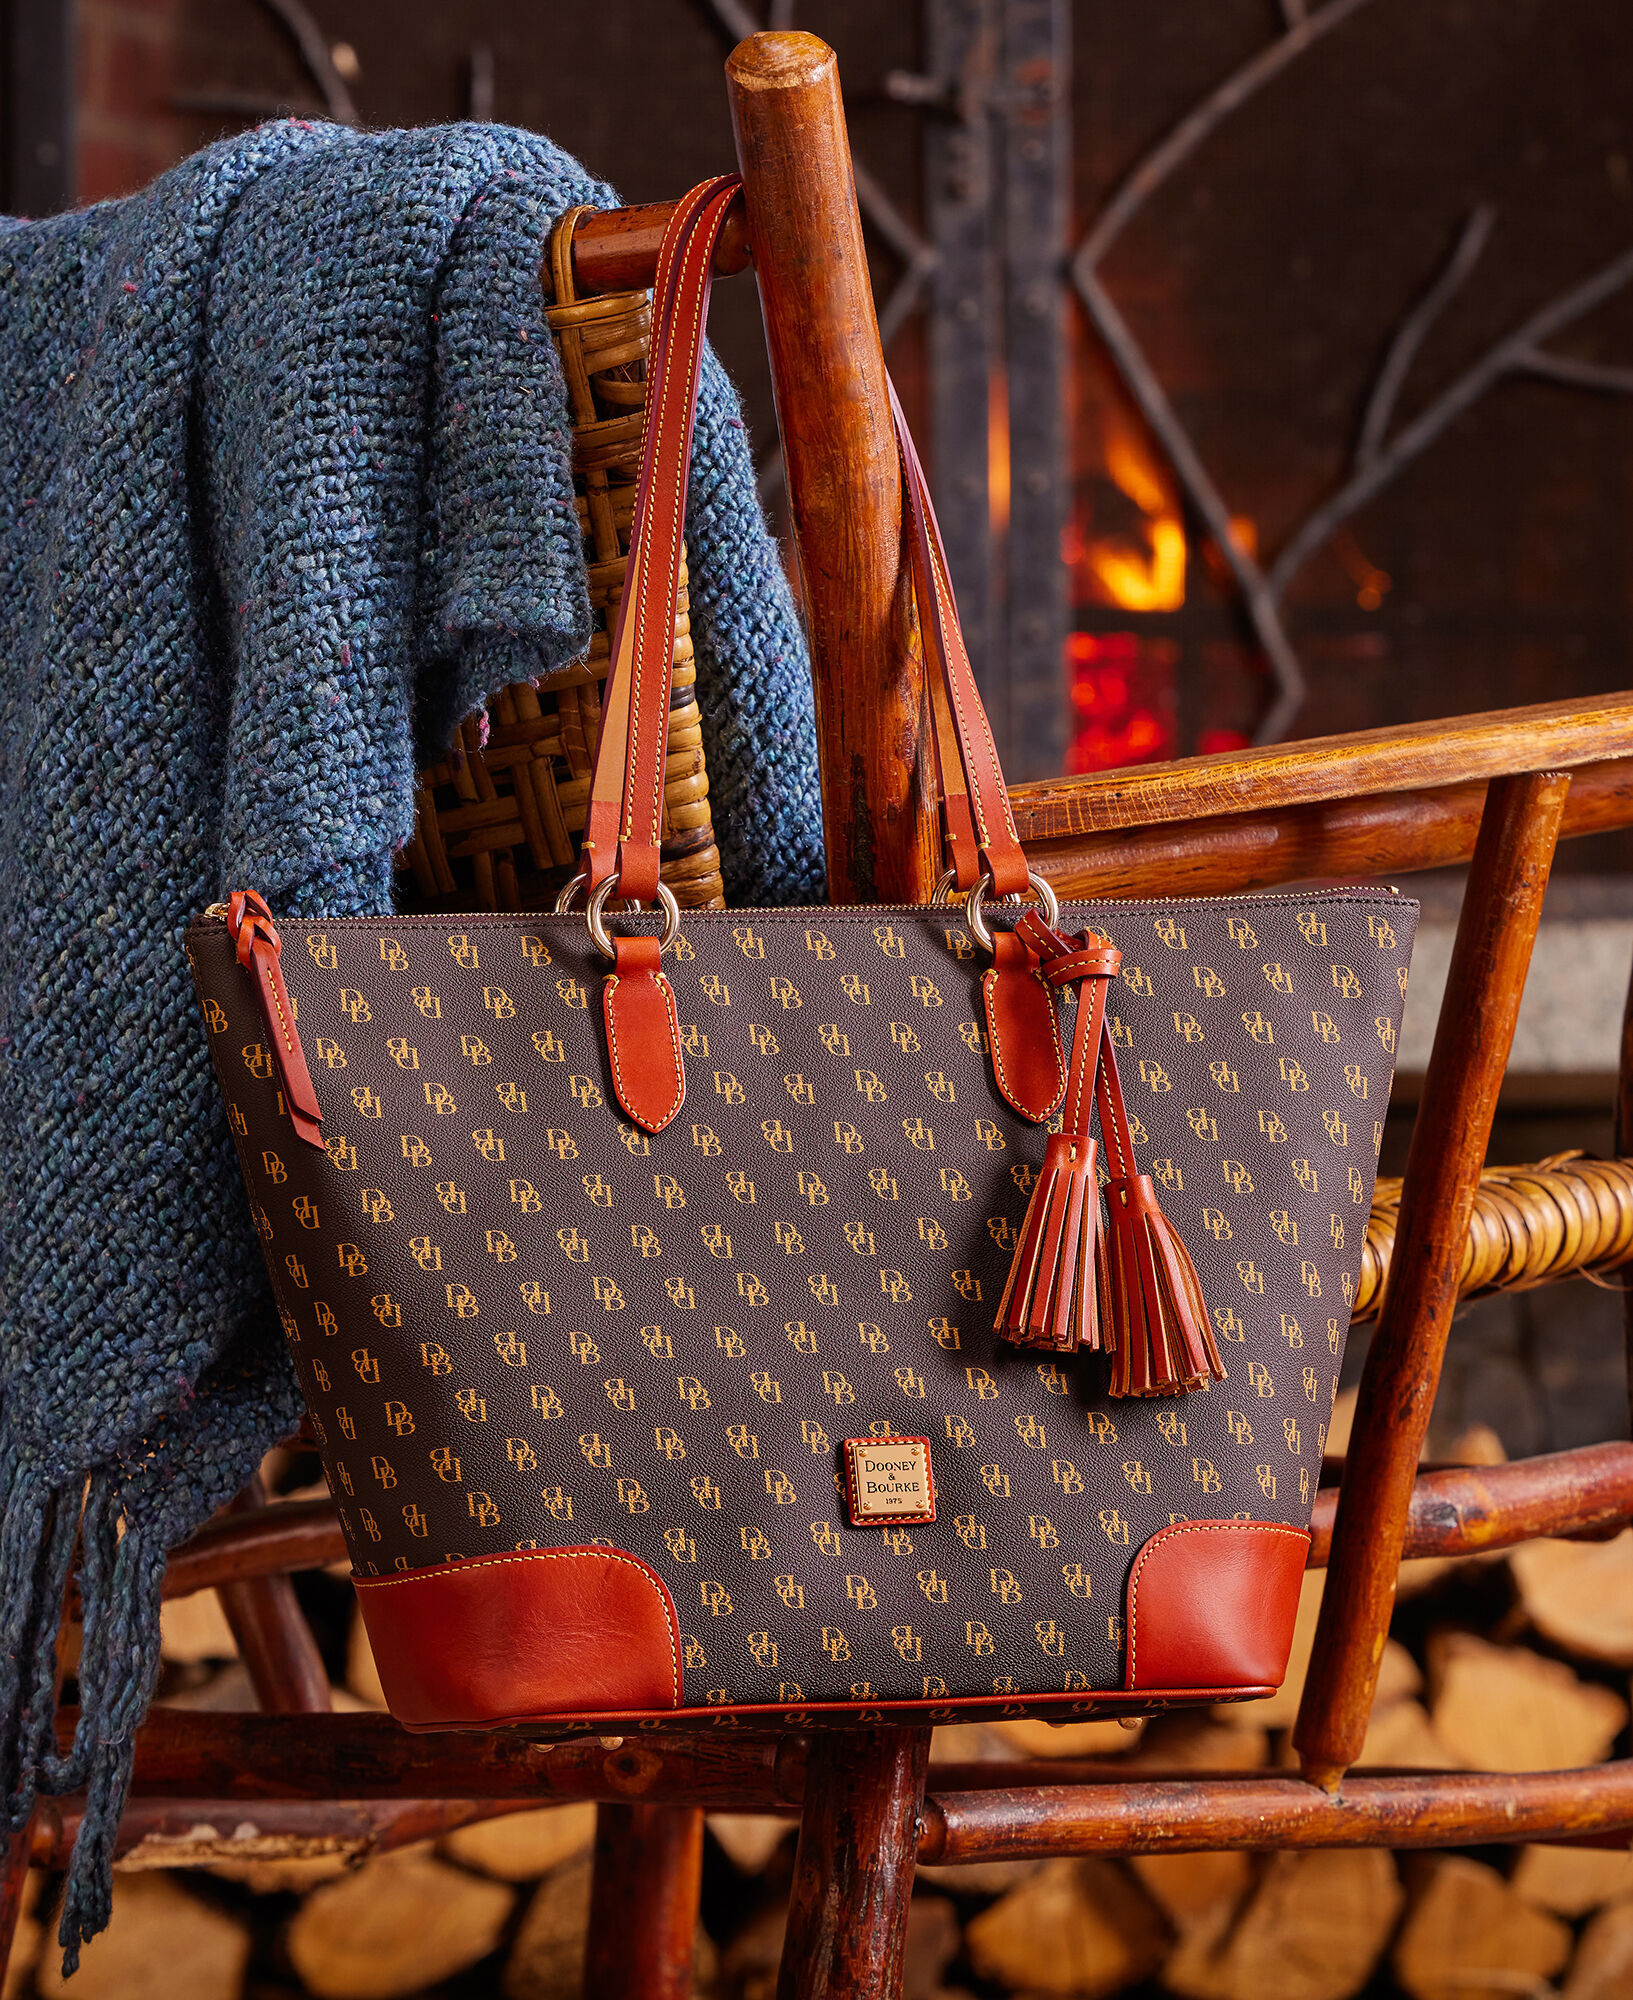 Who else loves Dooney & Bourke? Well your in good company